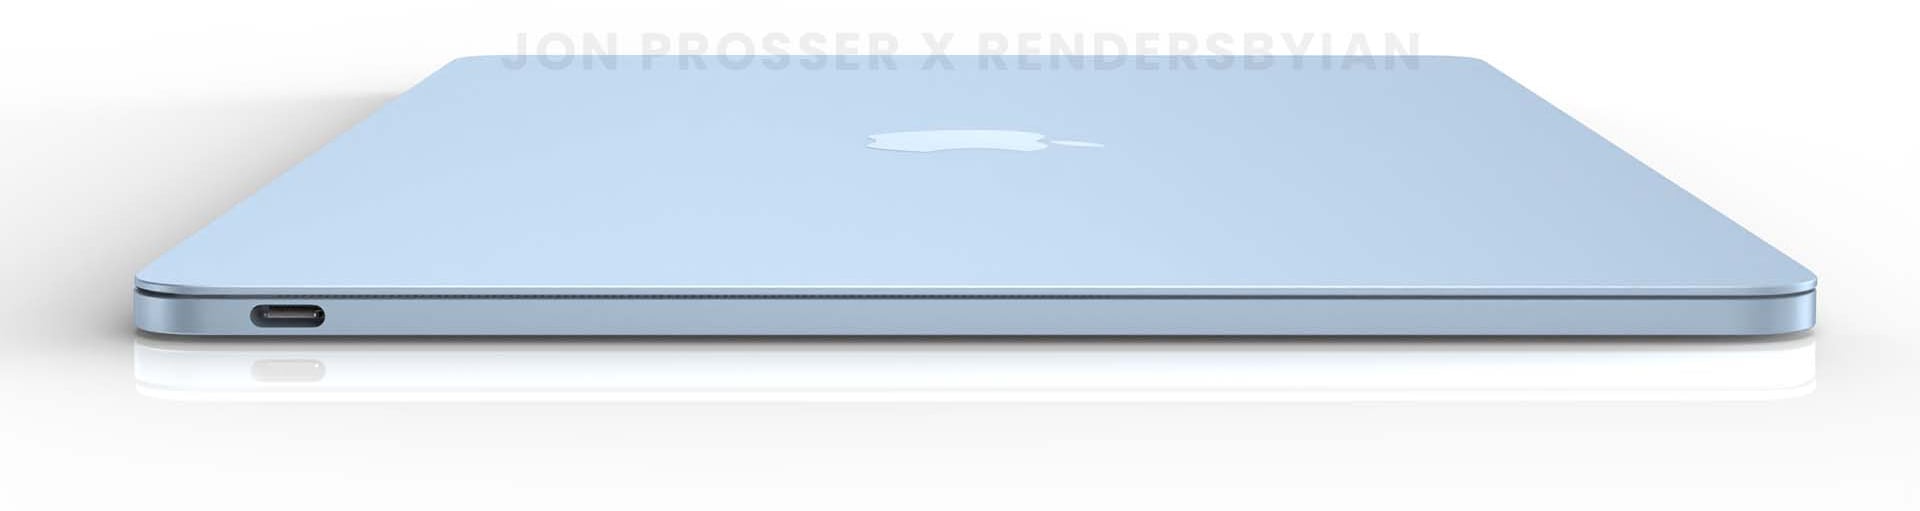 Next MacBook Air Powered by M2, To Come in Multiple Colors Report